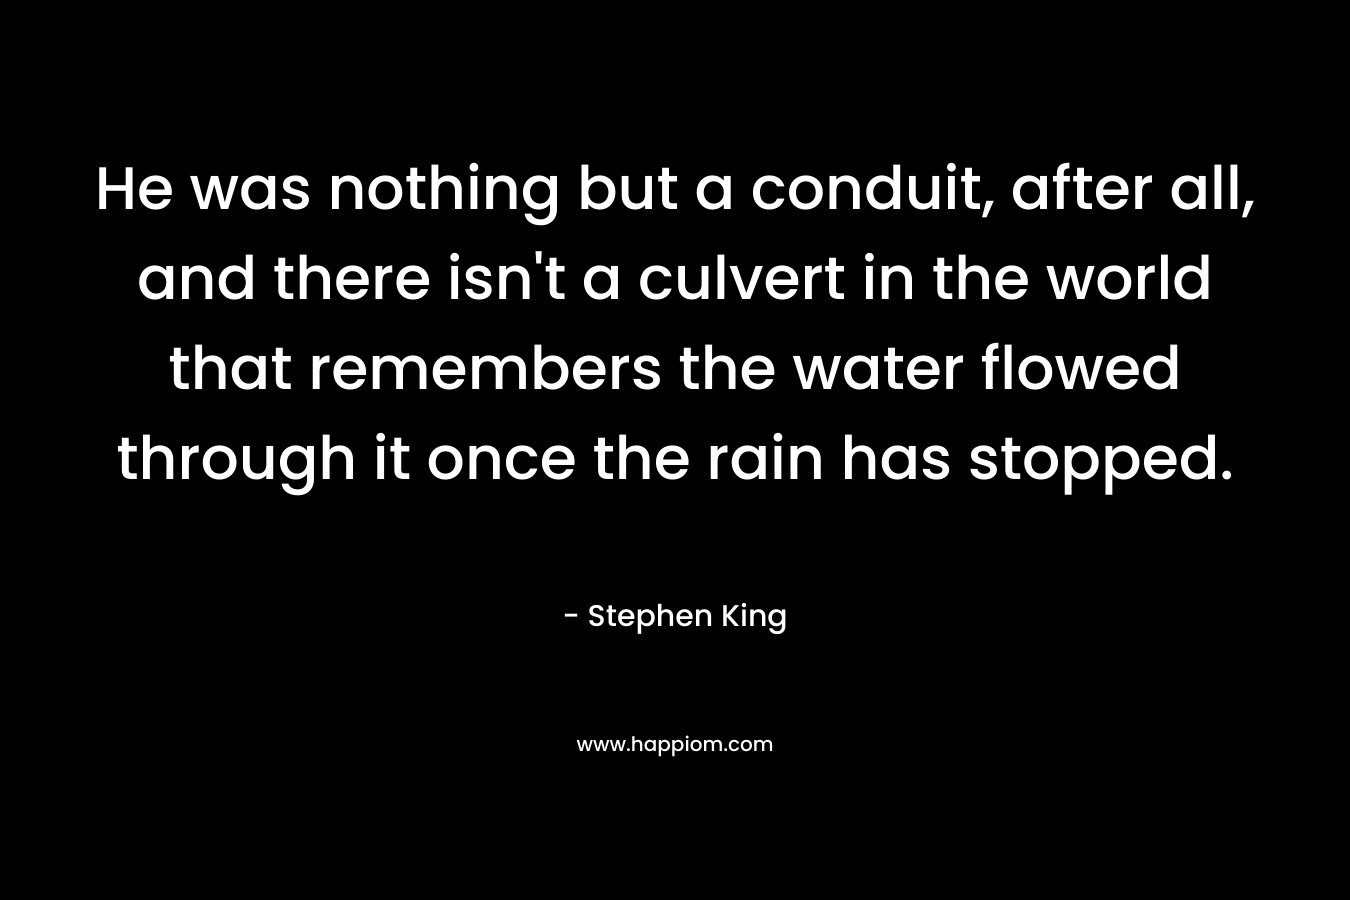 He was nothing but a conduit, after all, and there isn’t a culvert in the world that remembers the water flowed through it once the rain has stopped. – Stephen King